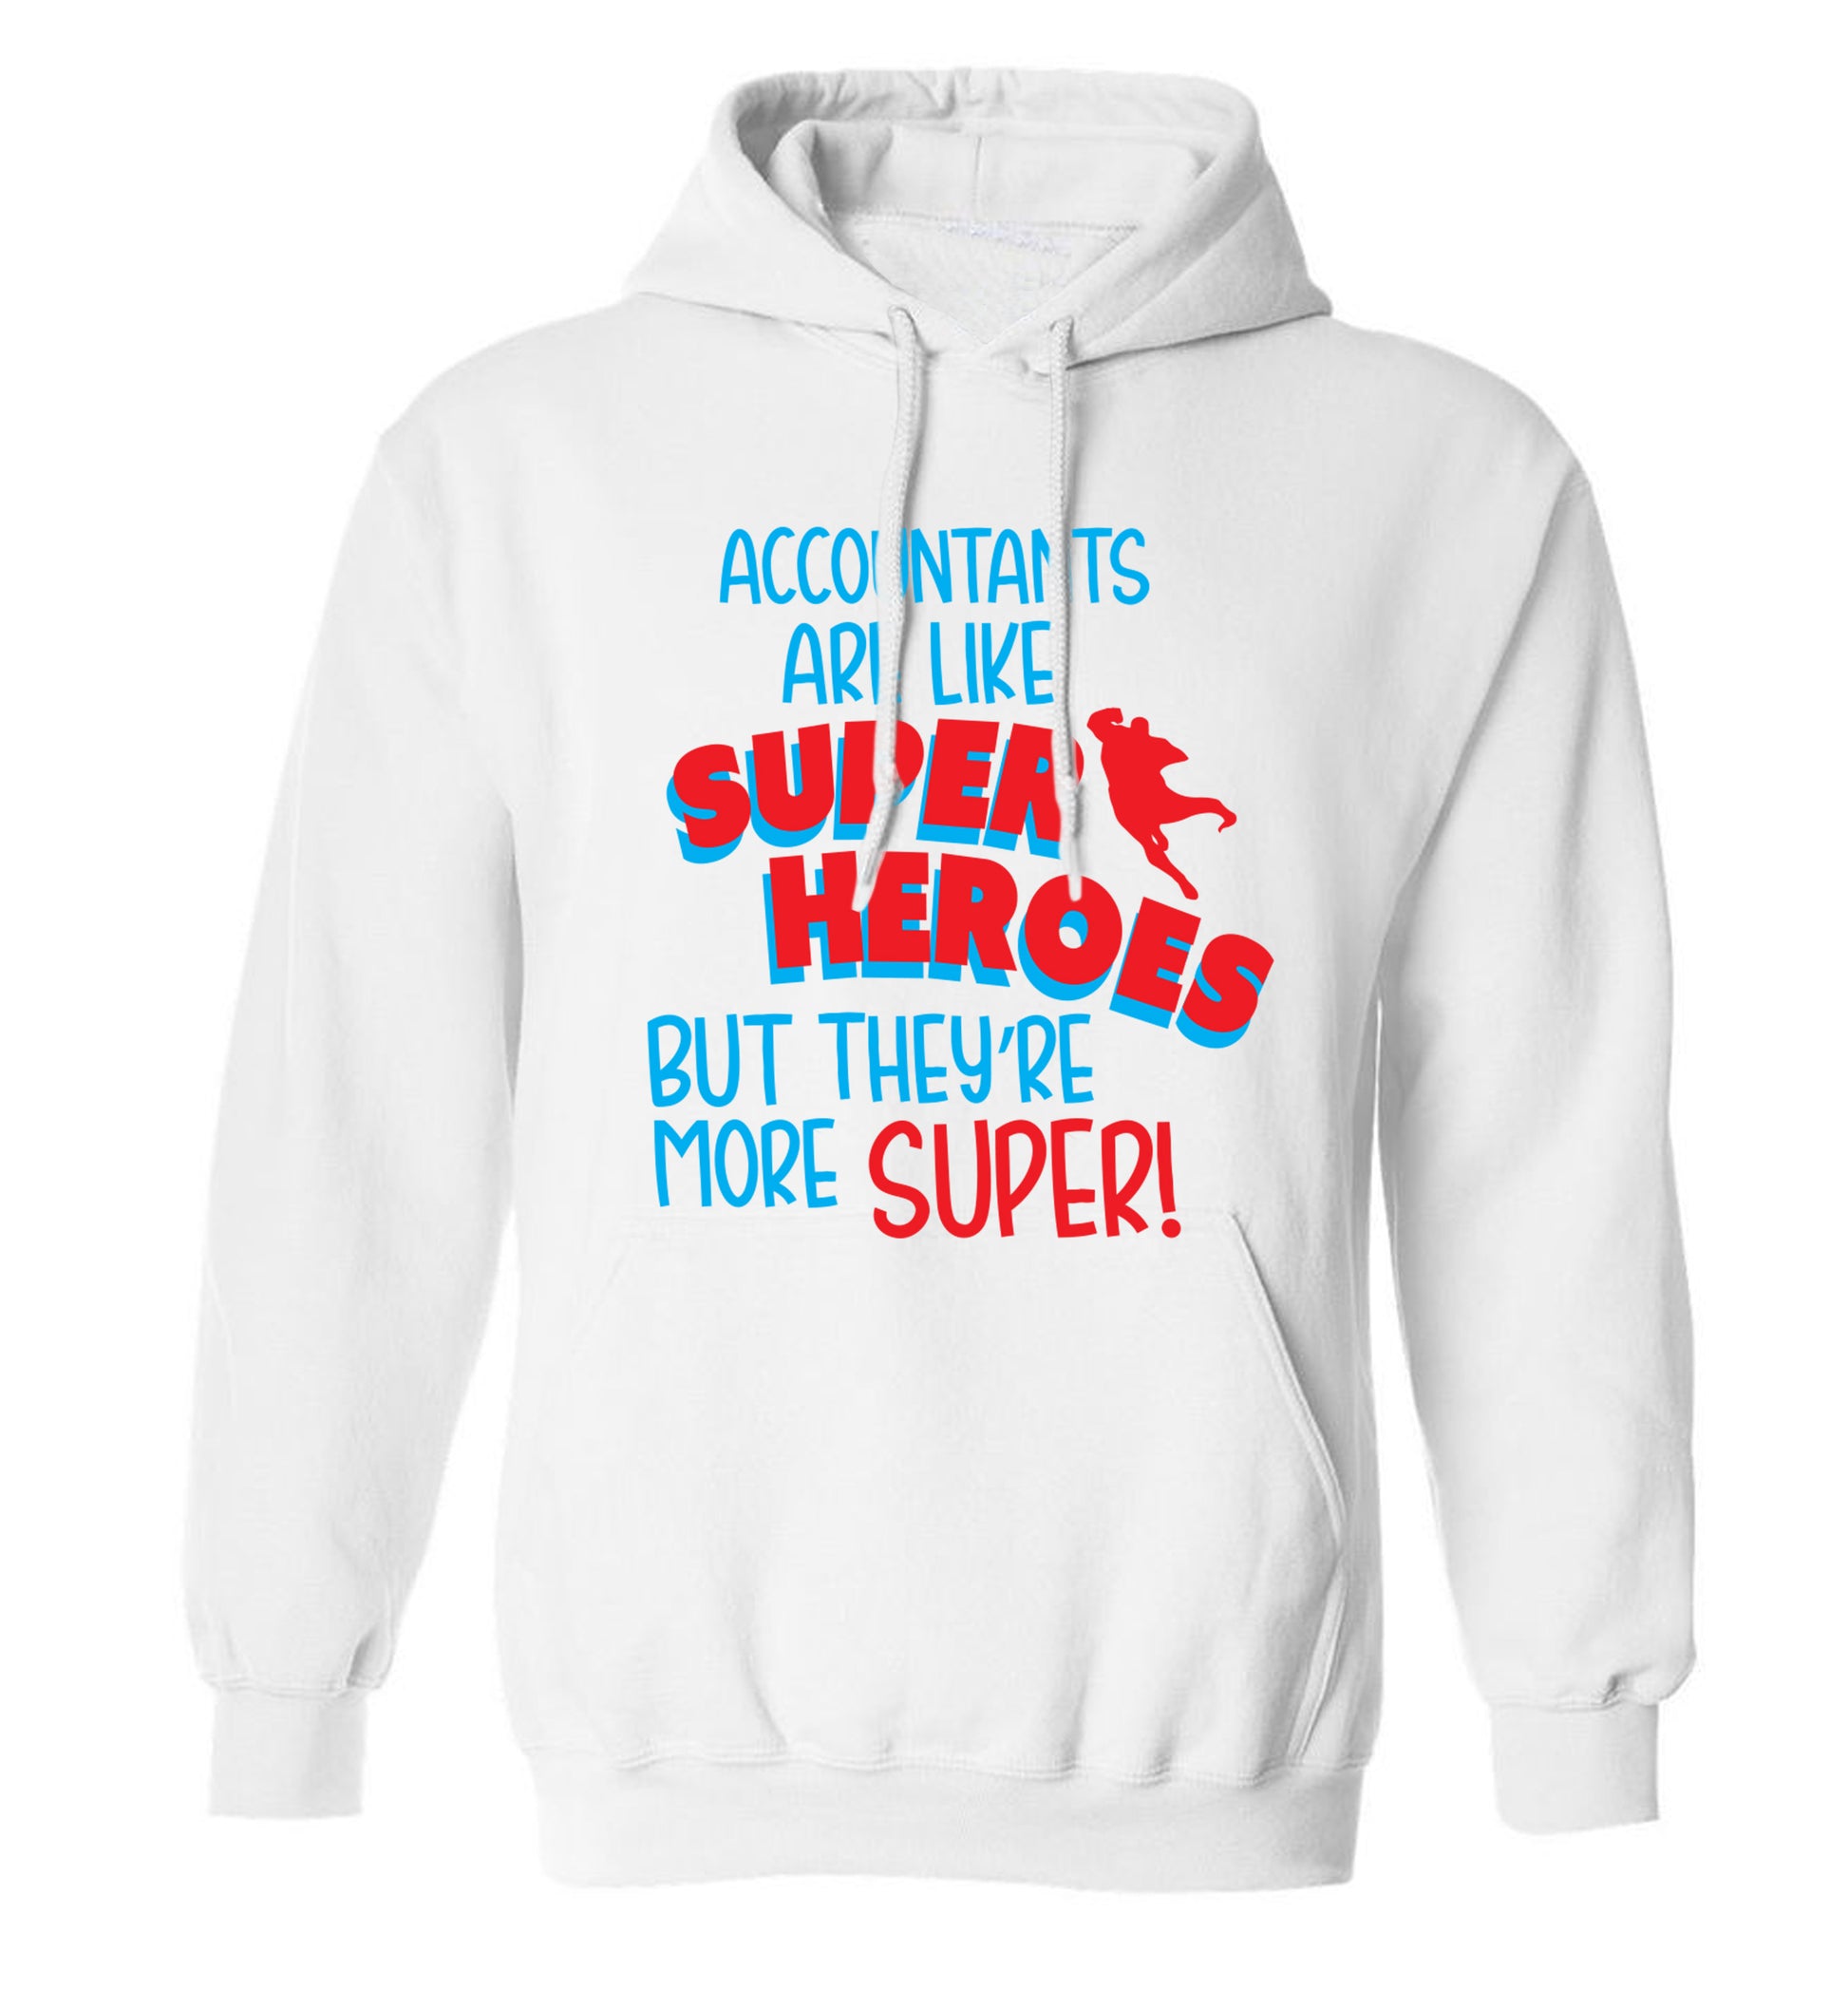 Accountants are like superheroes but they're more super adults unisex white hoodie 2XL